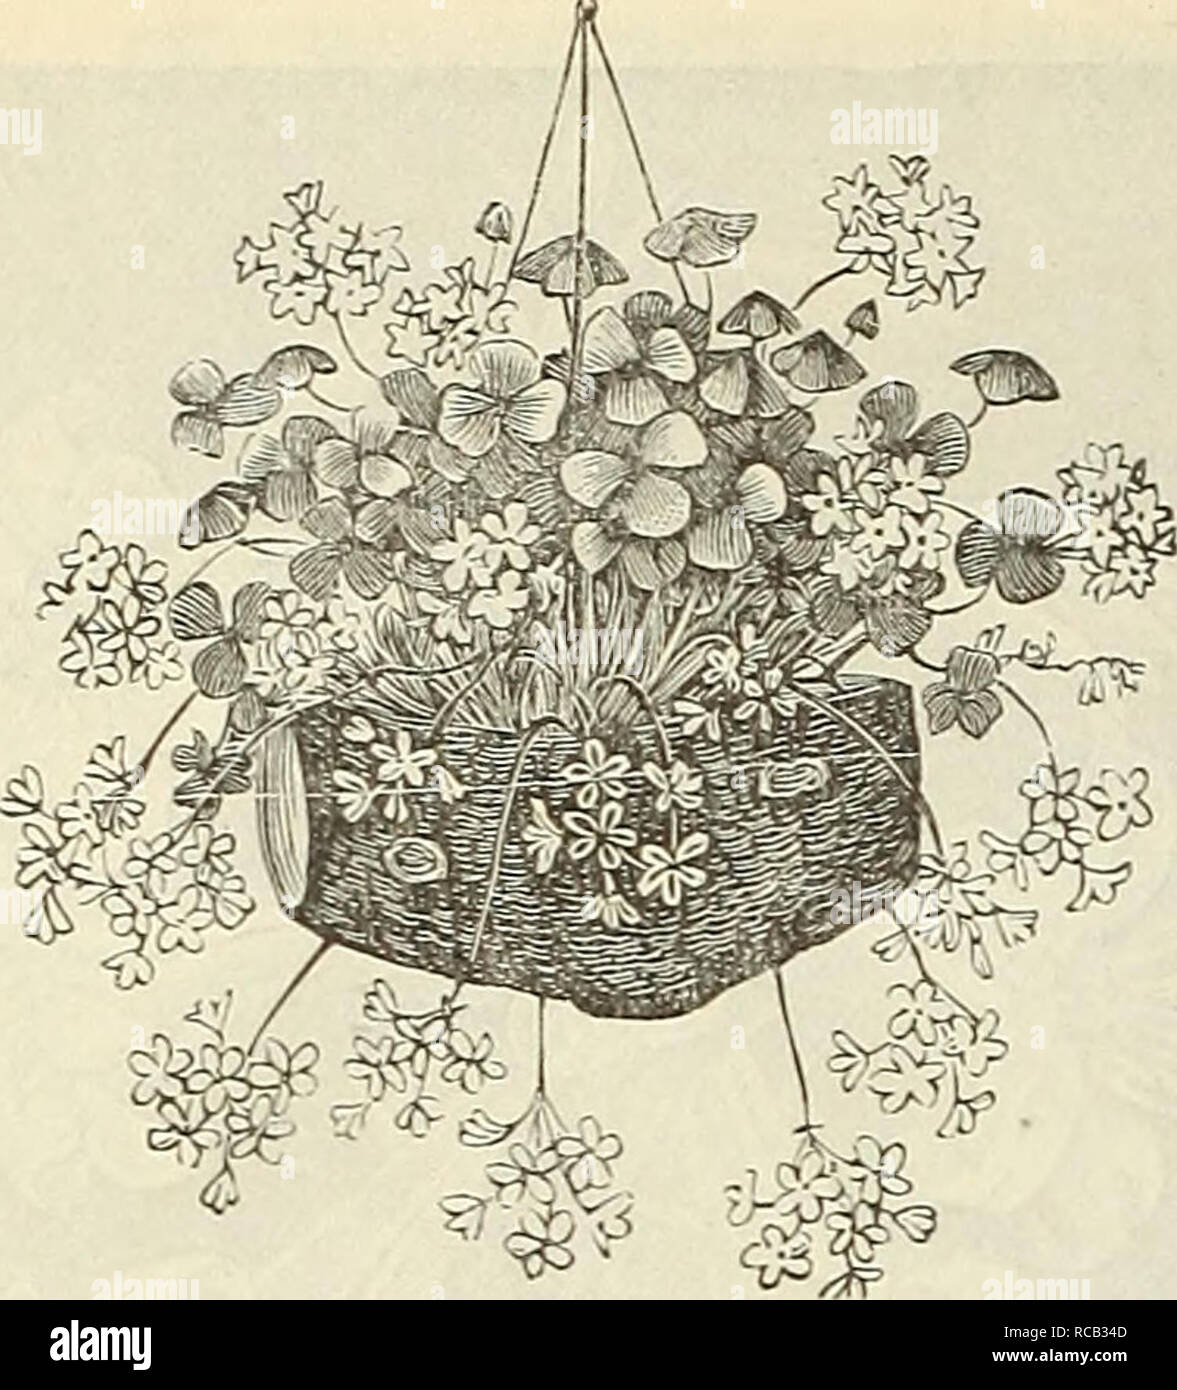 . Dreer's bulb list : 1887. Nurseries (Horticulture) Catalogs; Commercial catalogs Seeds; Bulbs (Plants) Seeds Catalogs; Flowers Seeds Catalogs; Vegetables Seeds Catalogs. 20 Dreer'S Putumn Bulb Lcist.. Oxalis Floribunda. Oxalis. These are profuse bloomers, and very attractive in the greenhouse or conservatory during the winter. Plant three or four bulbs in a pot; the pots should be kept near the glass to prevent the foliage from growing too long. They require frequent watering while growing. Each. Doz. Bowei. The flowers are large and of the most brilliant rose color, and pro- duced in the gr Stock Photo